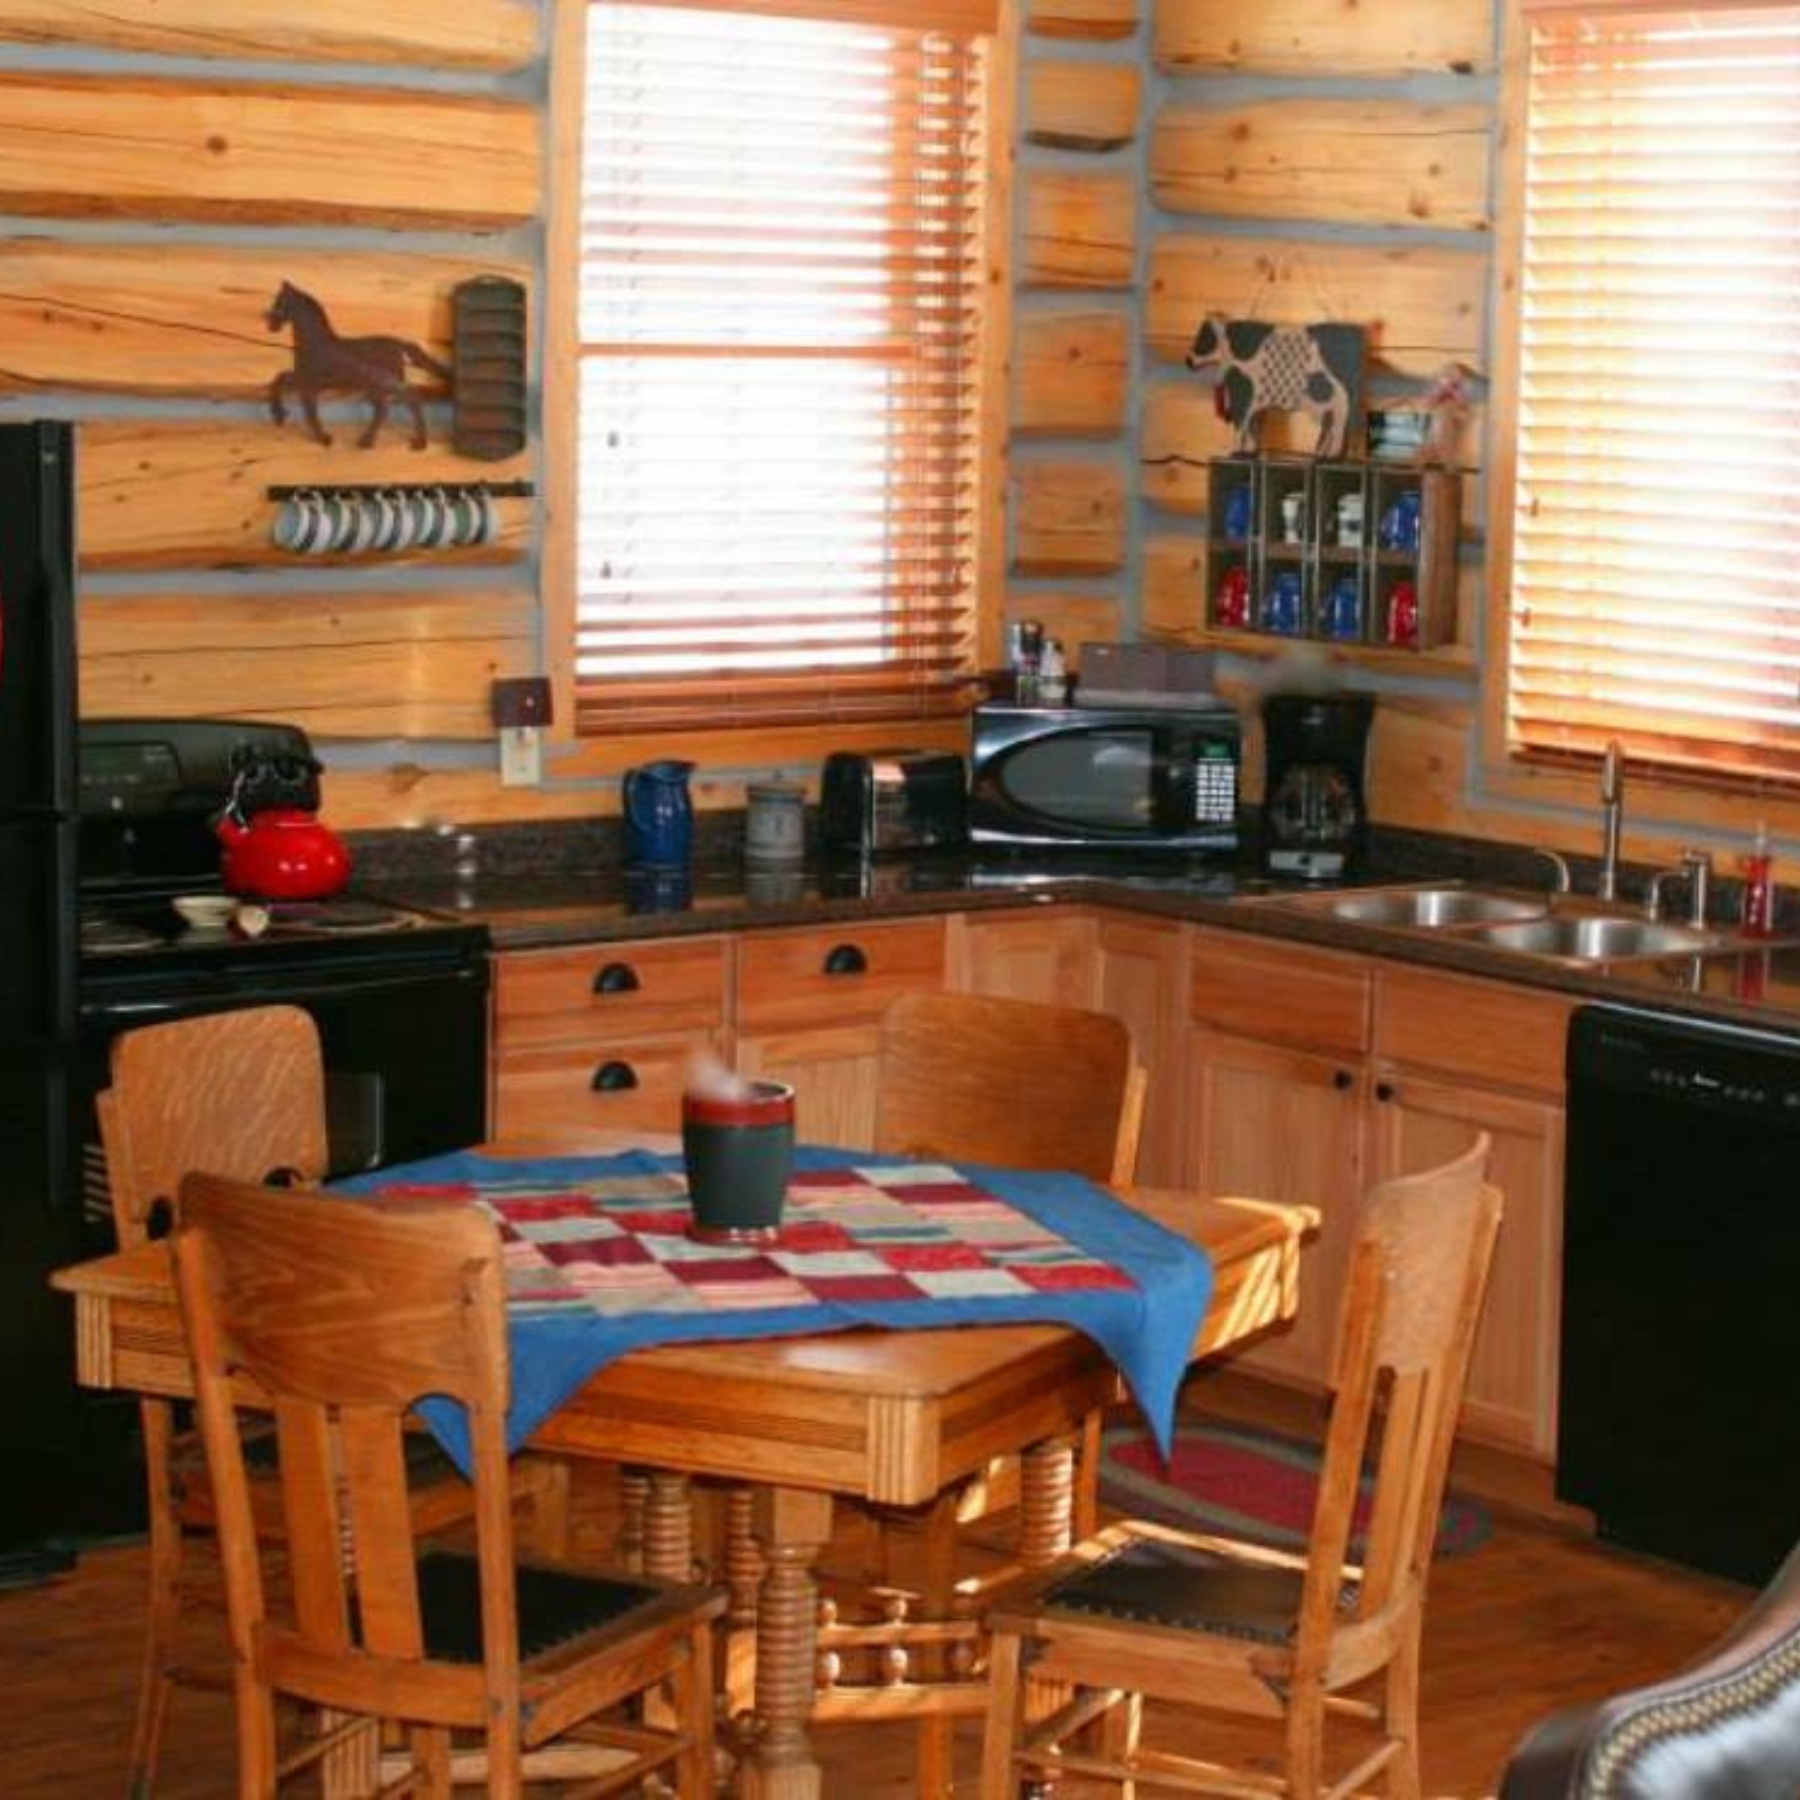 other cabin showing kitchen and eating area with custom quilts